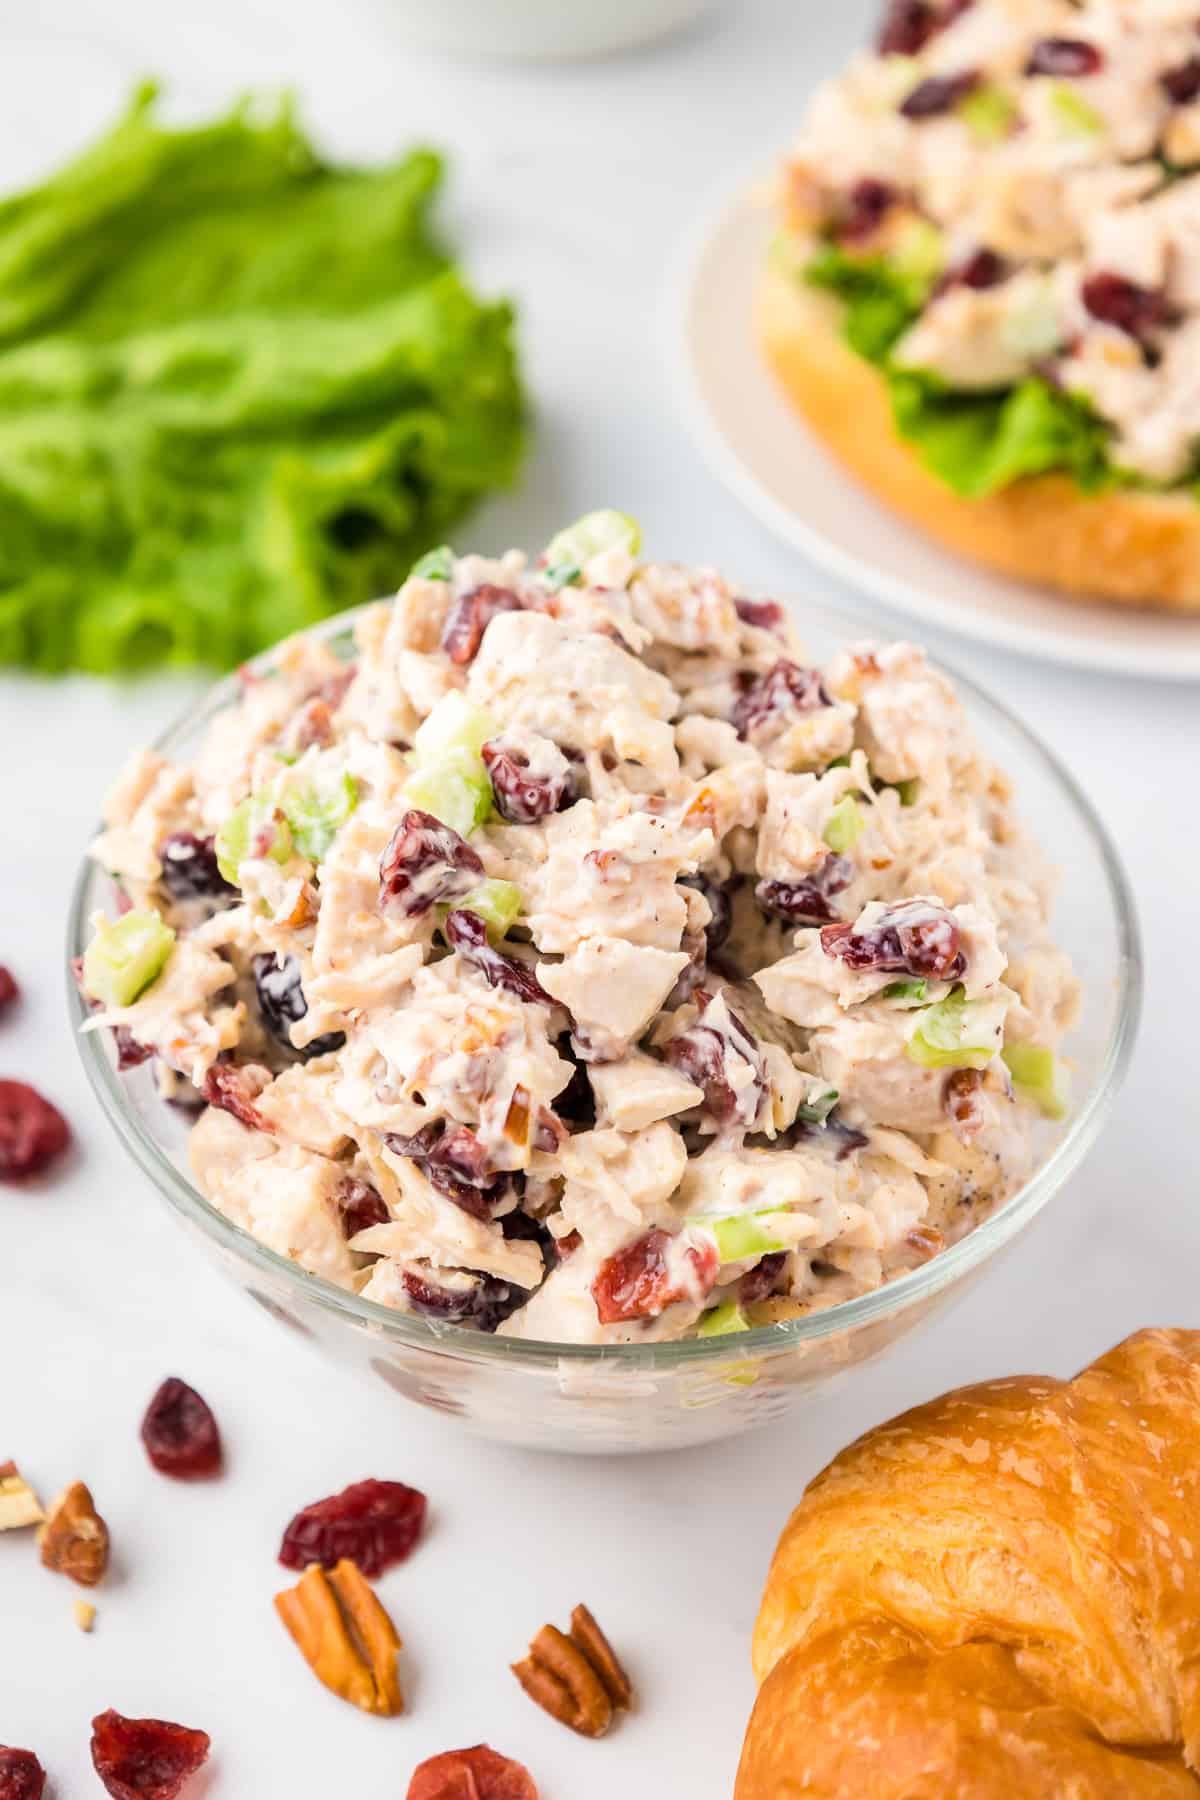 Cranberry pecan chicken salad mixed in a bowl on a counter with lettuce, croissants and part of a sandwich on the counter.